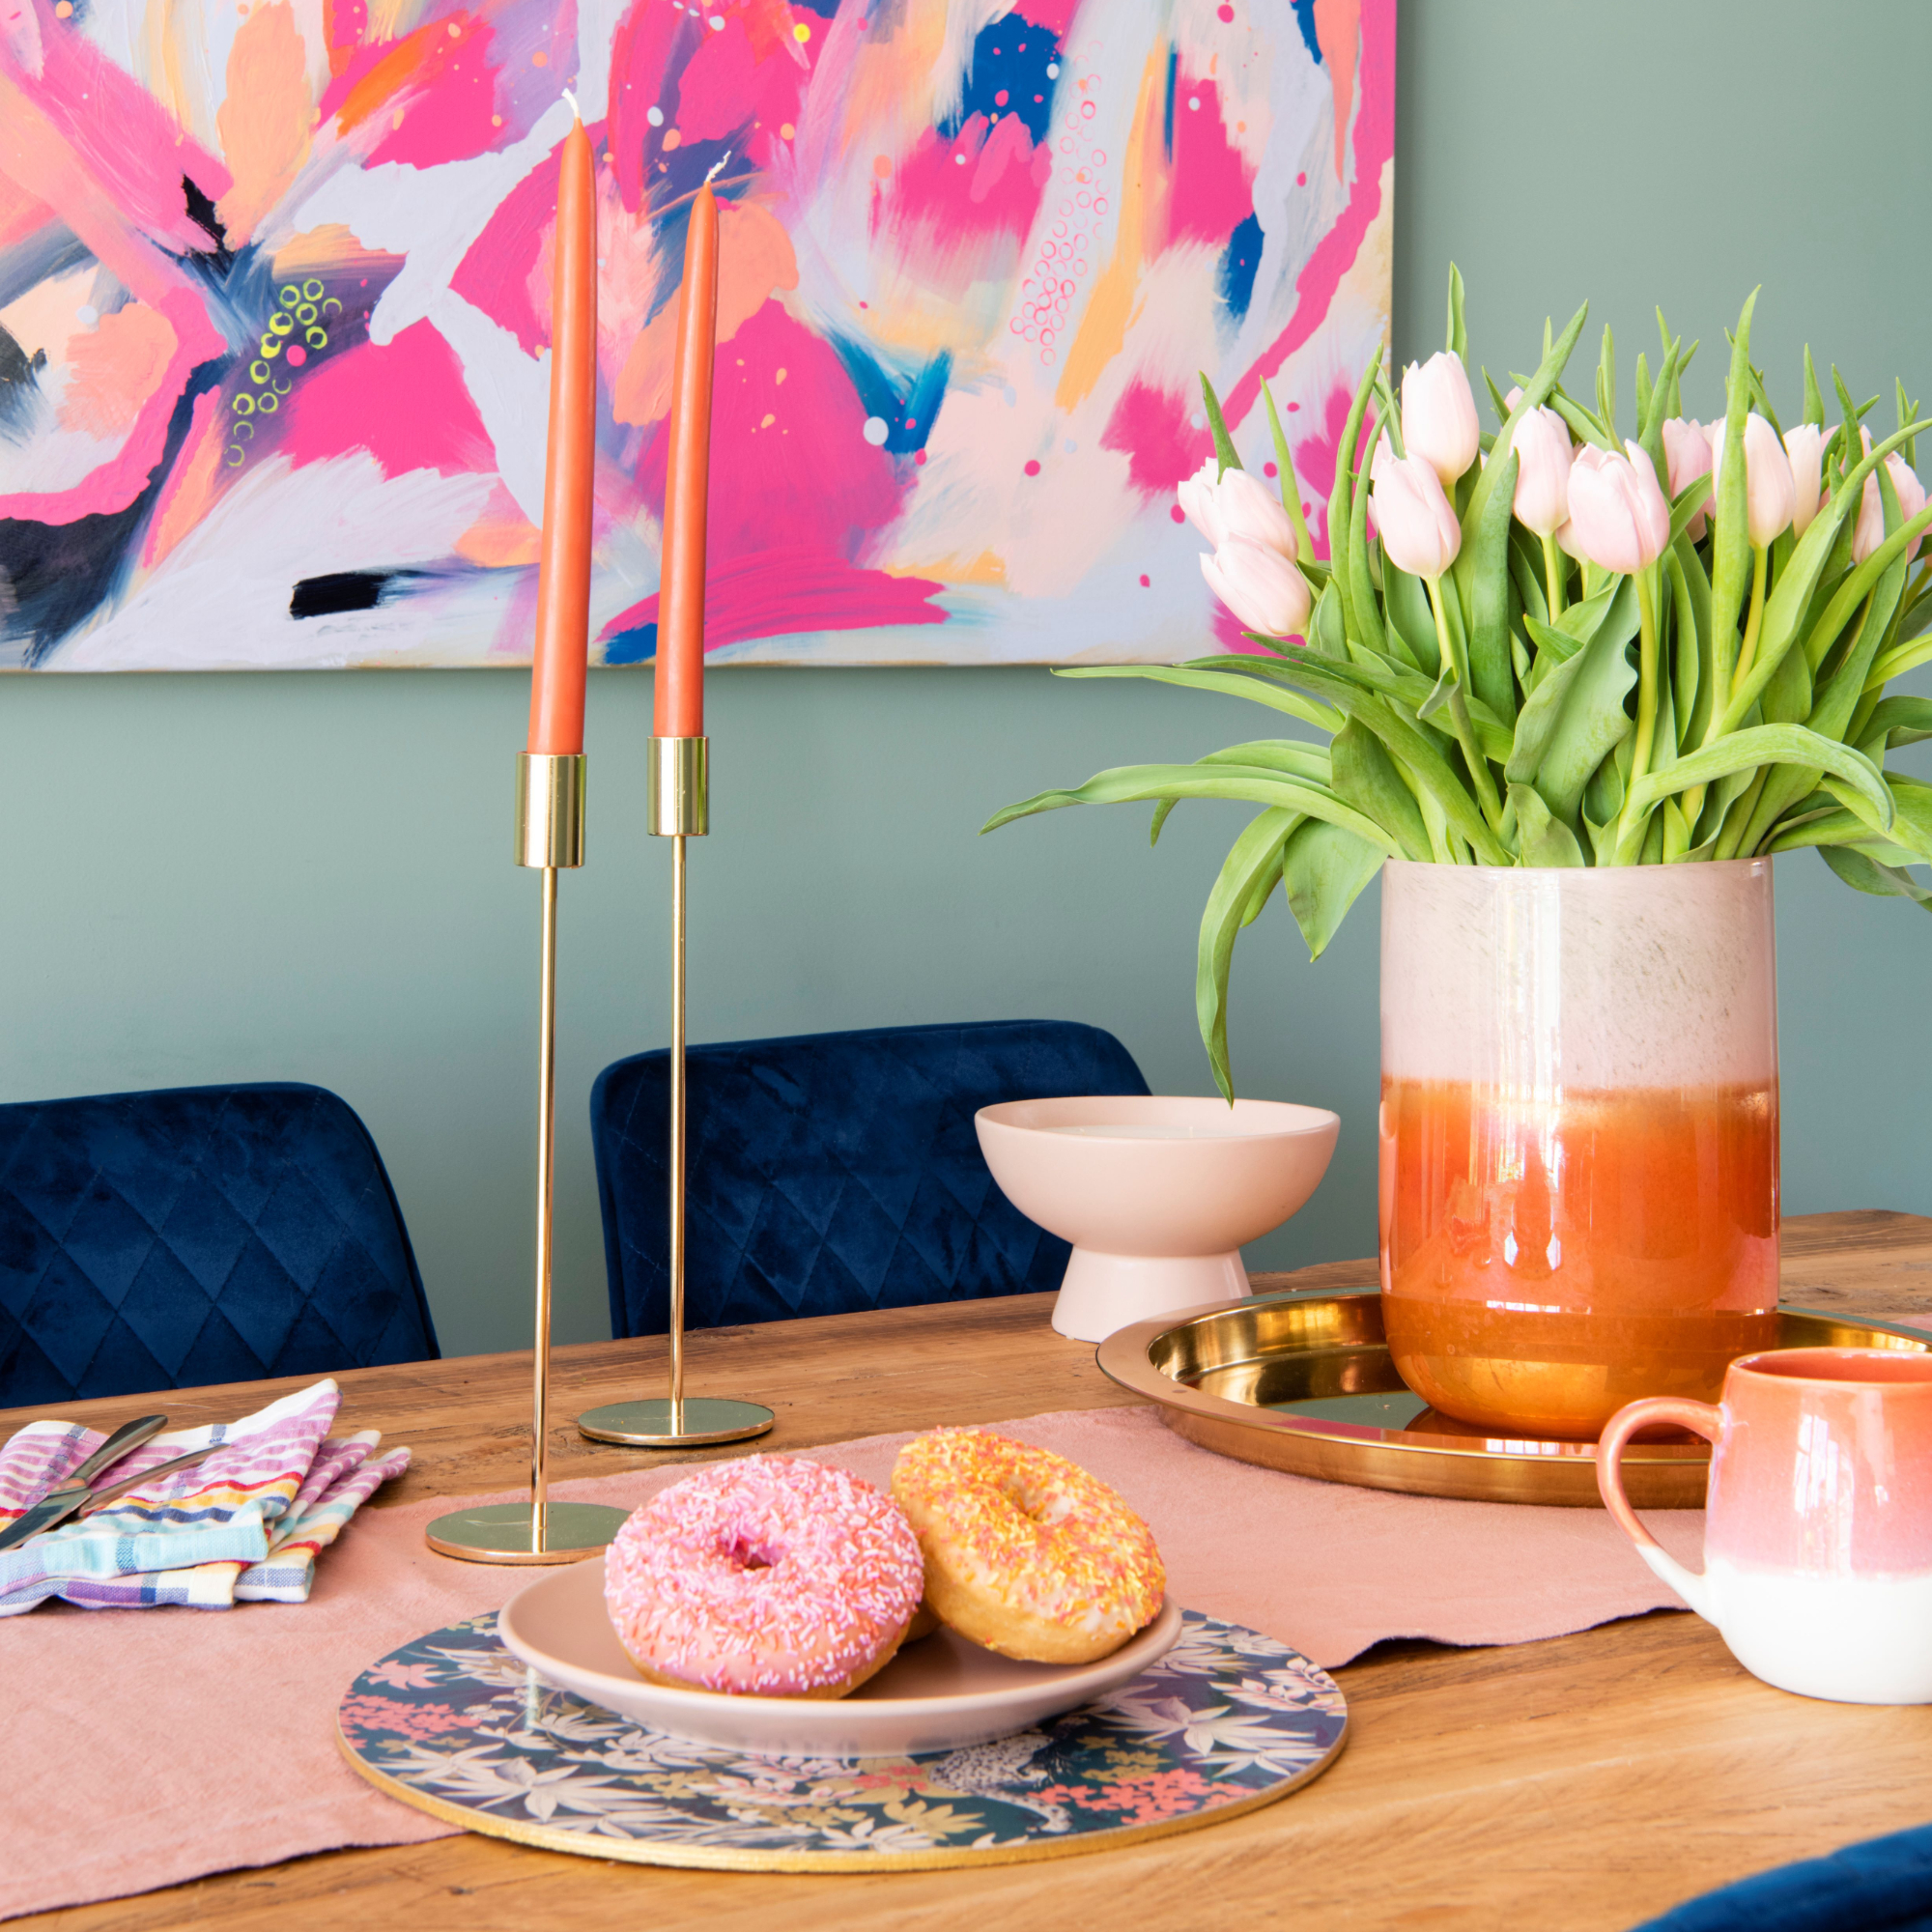 Wooden dining table with floral placemat, pink plate with doughnuts, gold candle holders and vase of tulips